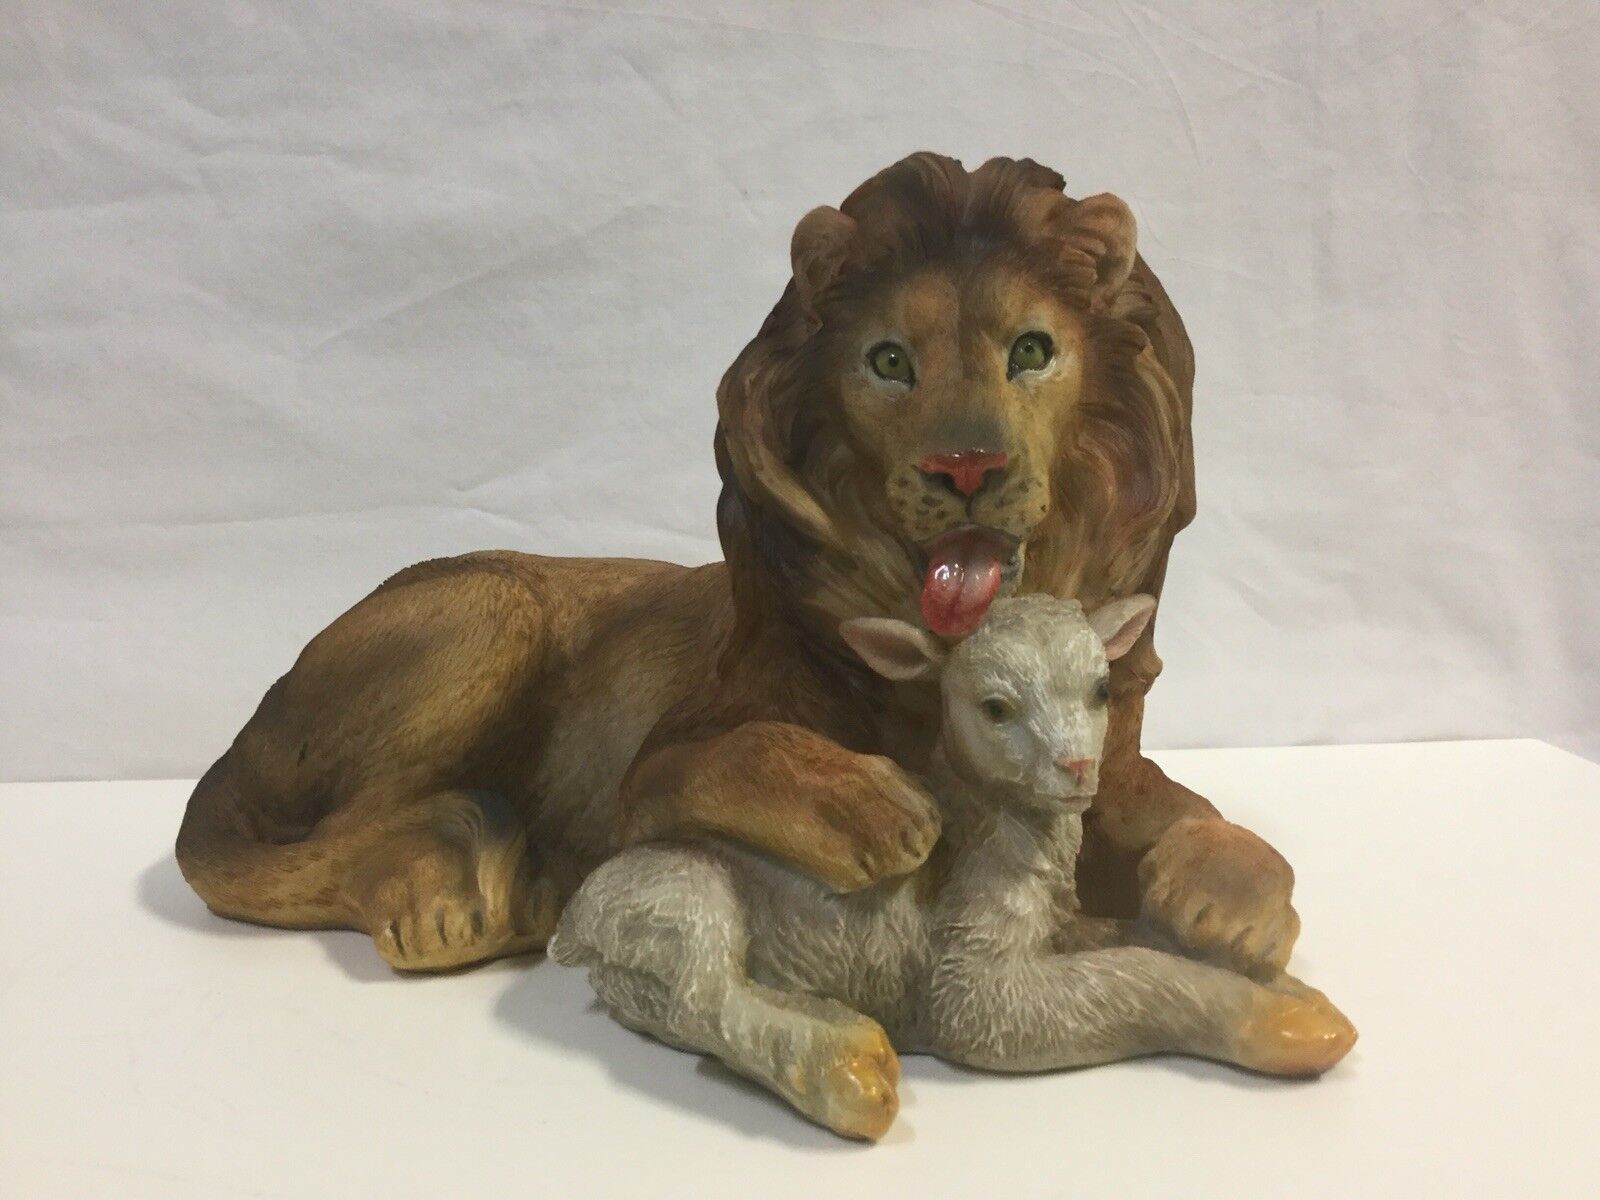 Resin Lion And Lamb Statue (198-2310)